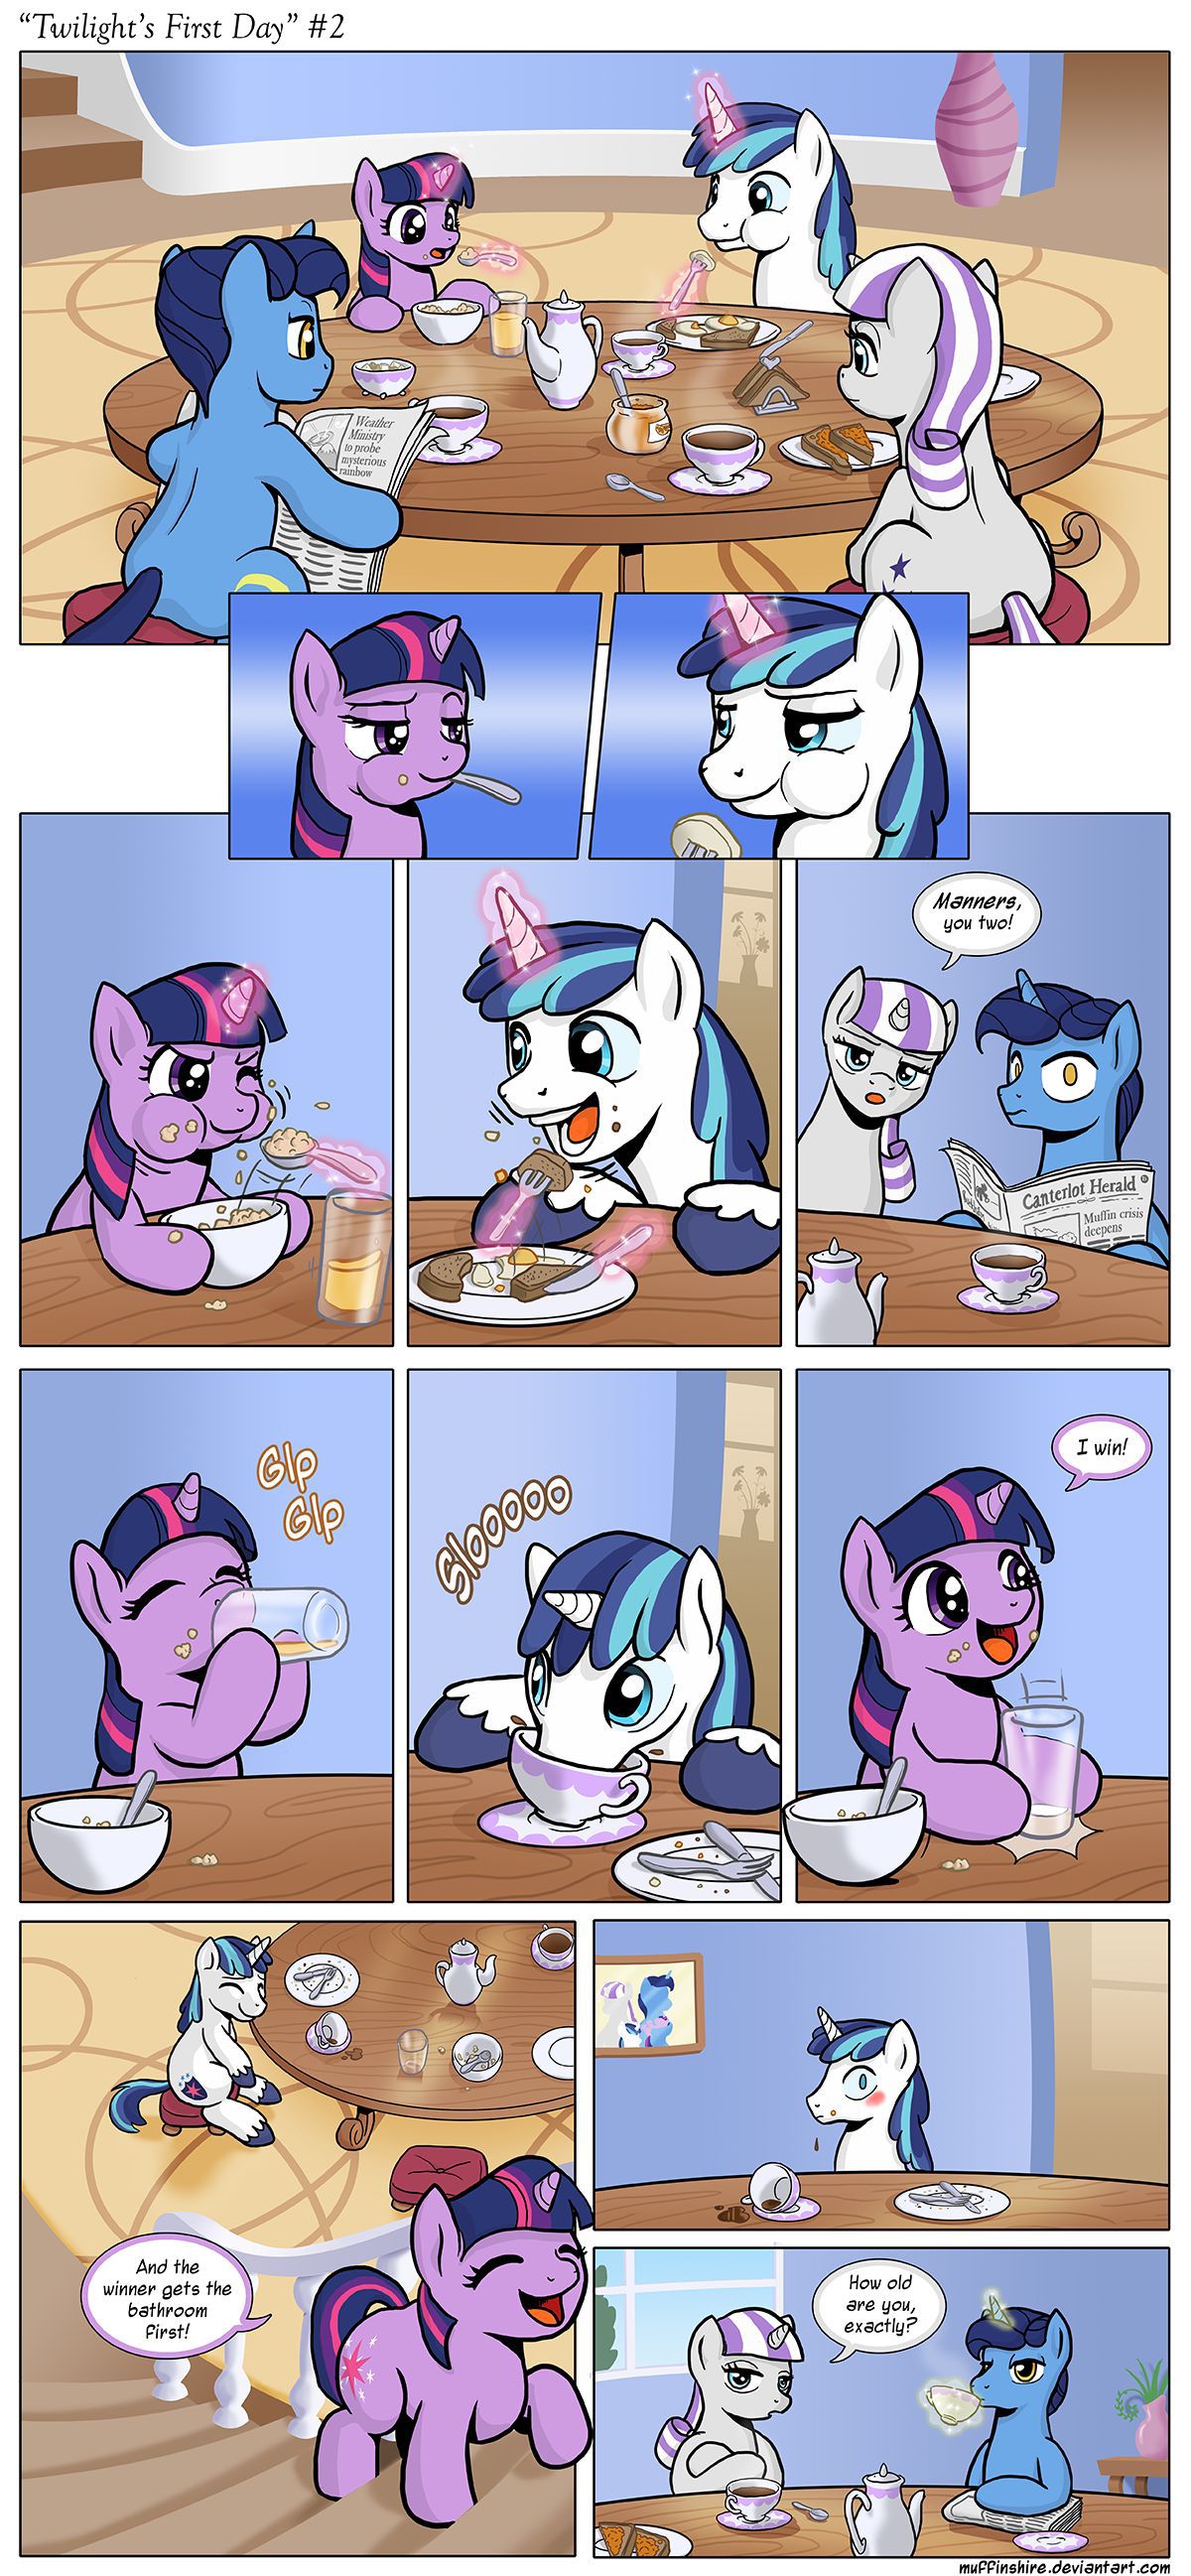 [Muffinshire] Twilight's First Day (My Little Pony: Friendship is Magic) [English] 2